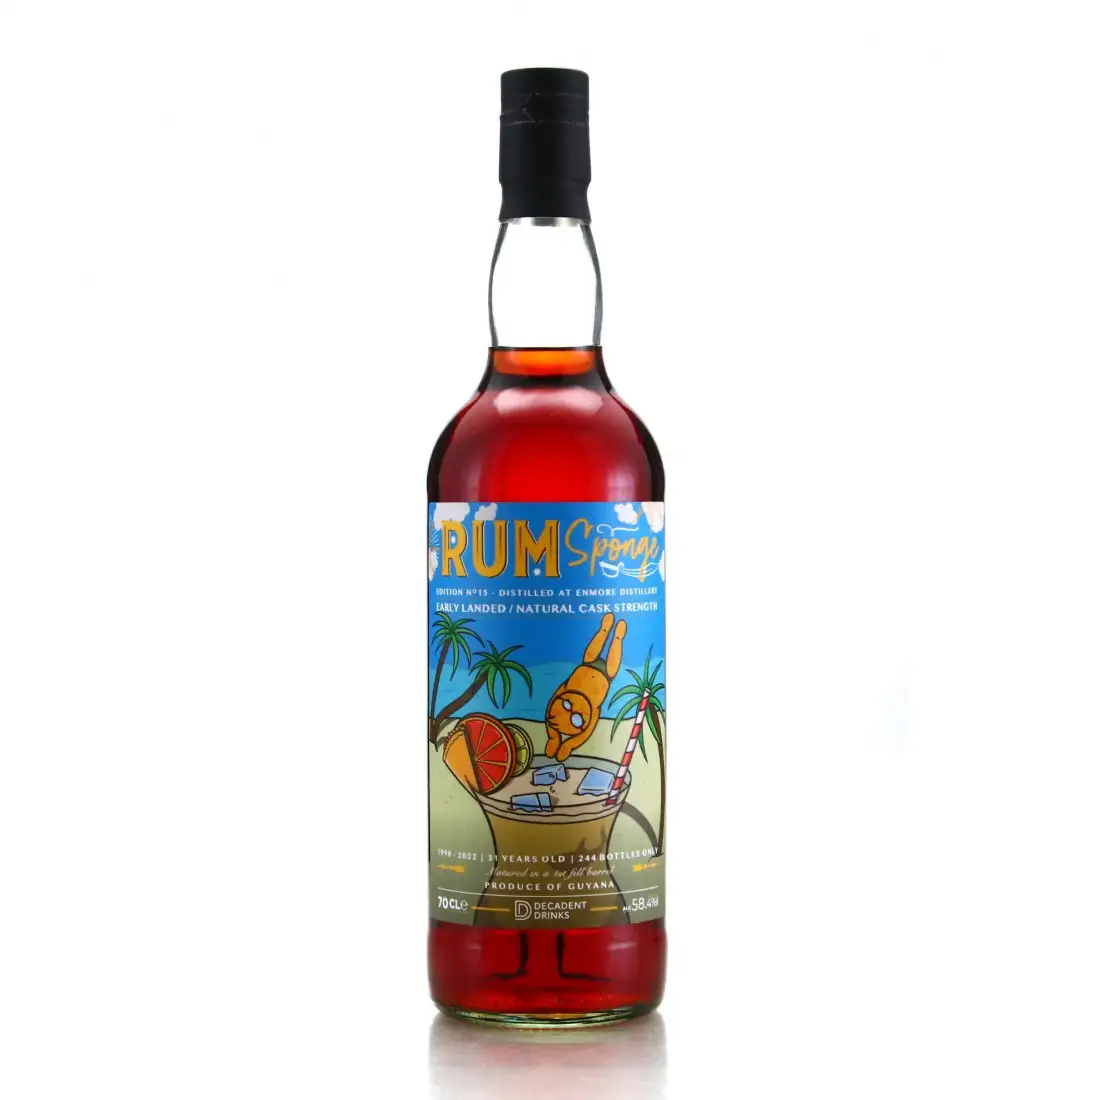 Image of the front of the bottle of the rum Rum Sponge No. 15